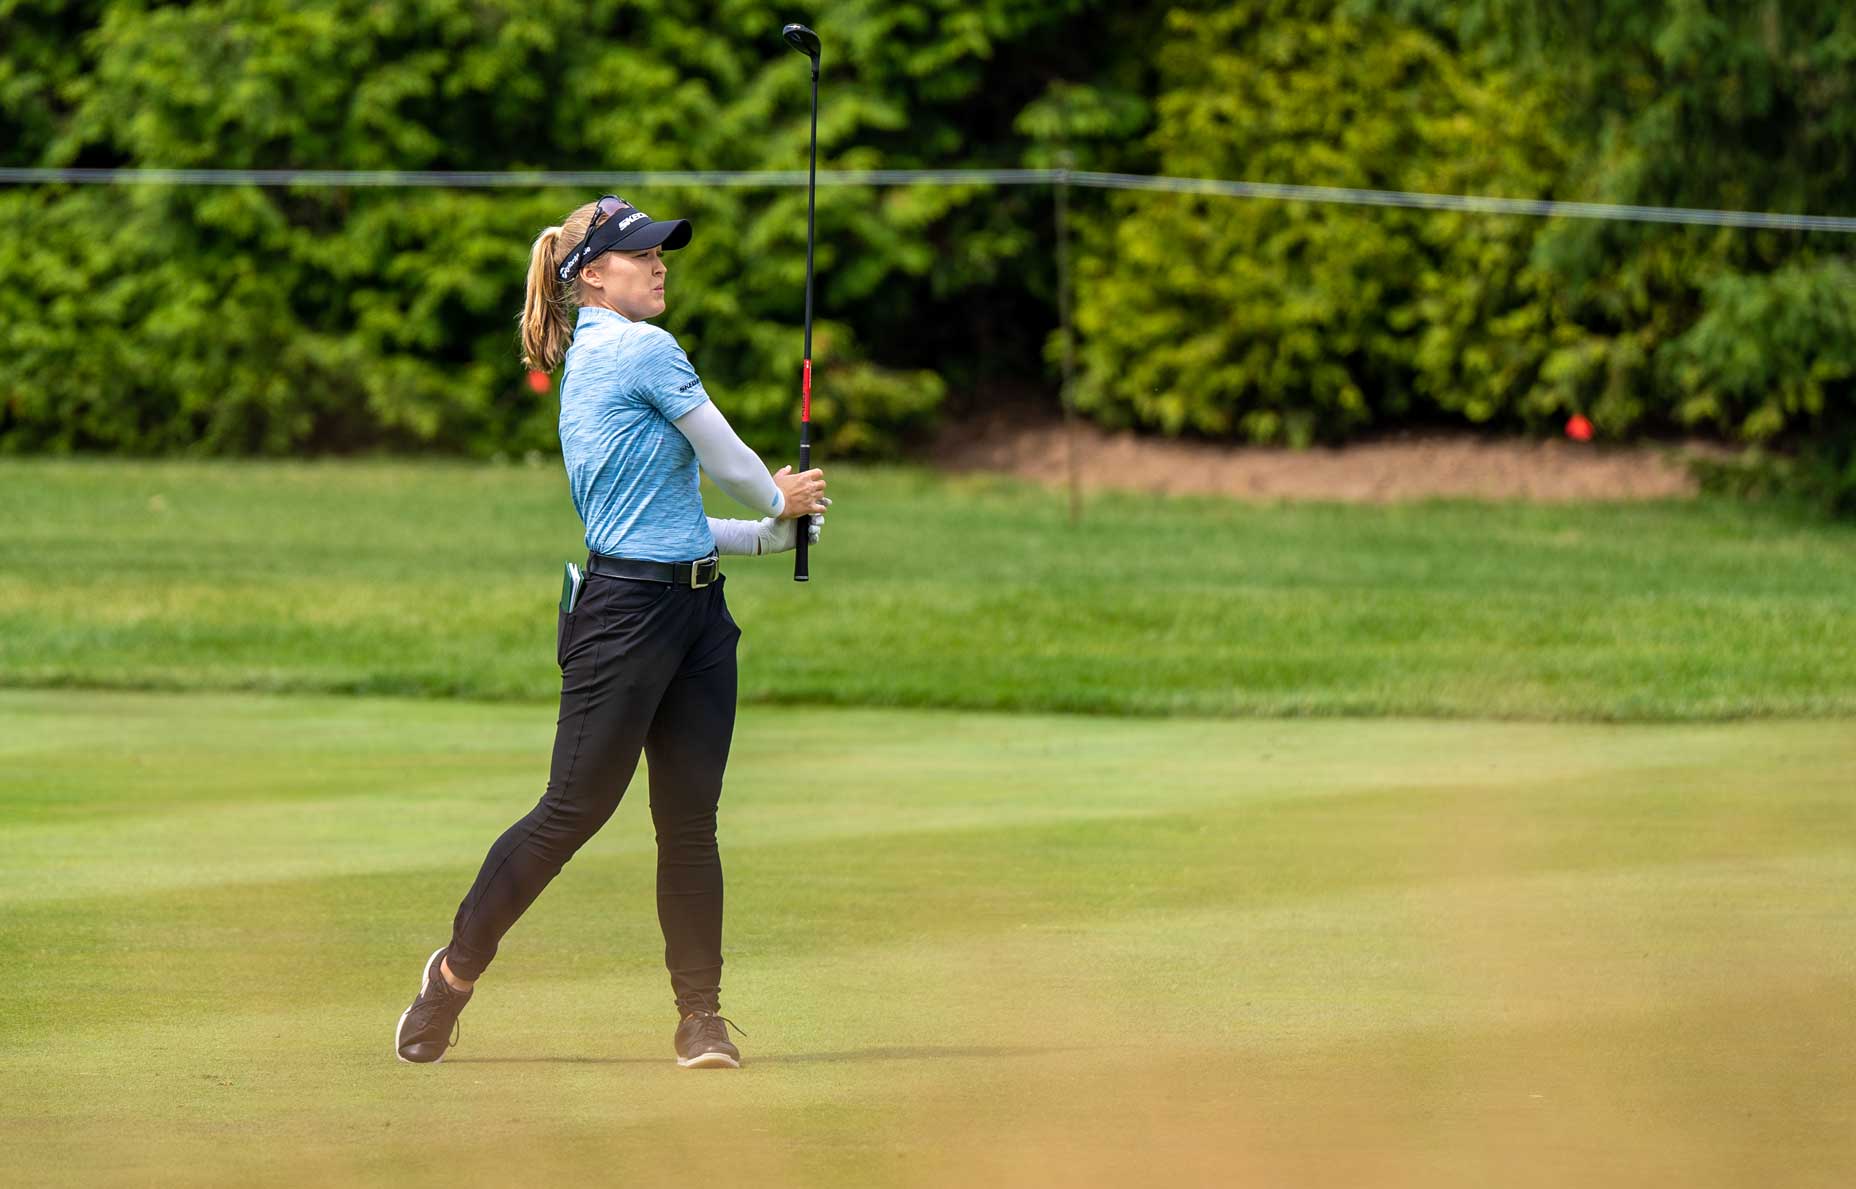 Why Brooke Henderson thinks her game is trending at Women's PGA